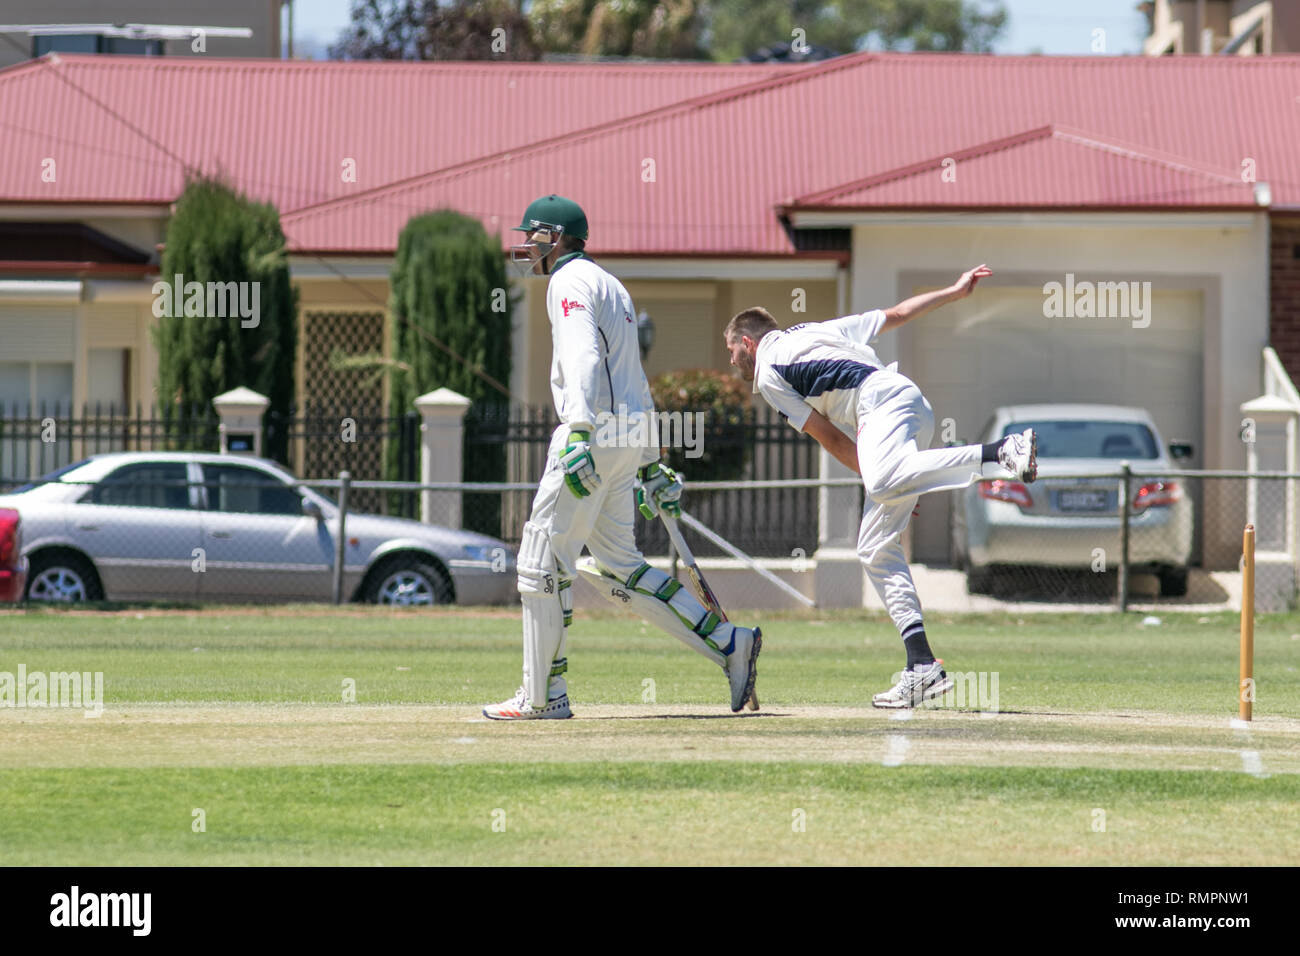 Adelaide, Australia. 16th Feb, 2019. An Associationl Cricket match between Woodville Rechabites Cricket club and Pooraka Mighty Bulls being played at the Matheson Reserve Adelaide on a hot saturday afternoon with temperatures of 29 degrees celsius Credit: amer ghazzal/Alamy Live News Stock Photo